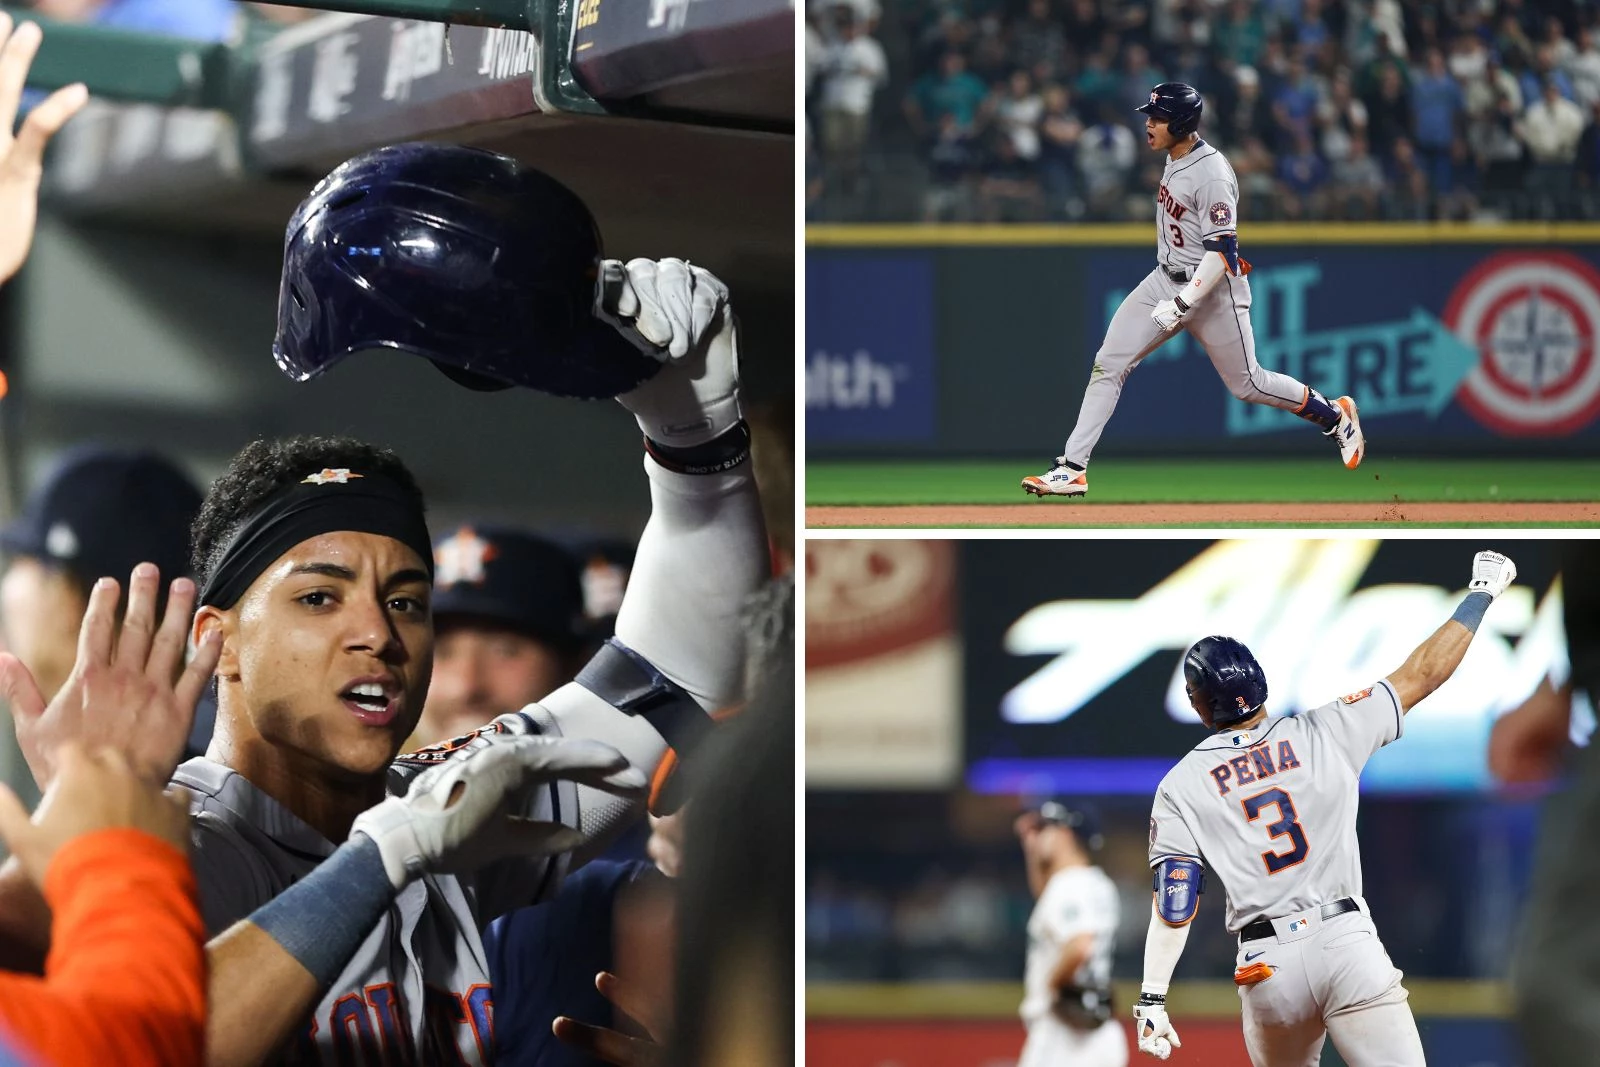 Former UMainer Hits HR in 18th Inning, leads to Astros Series Win